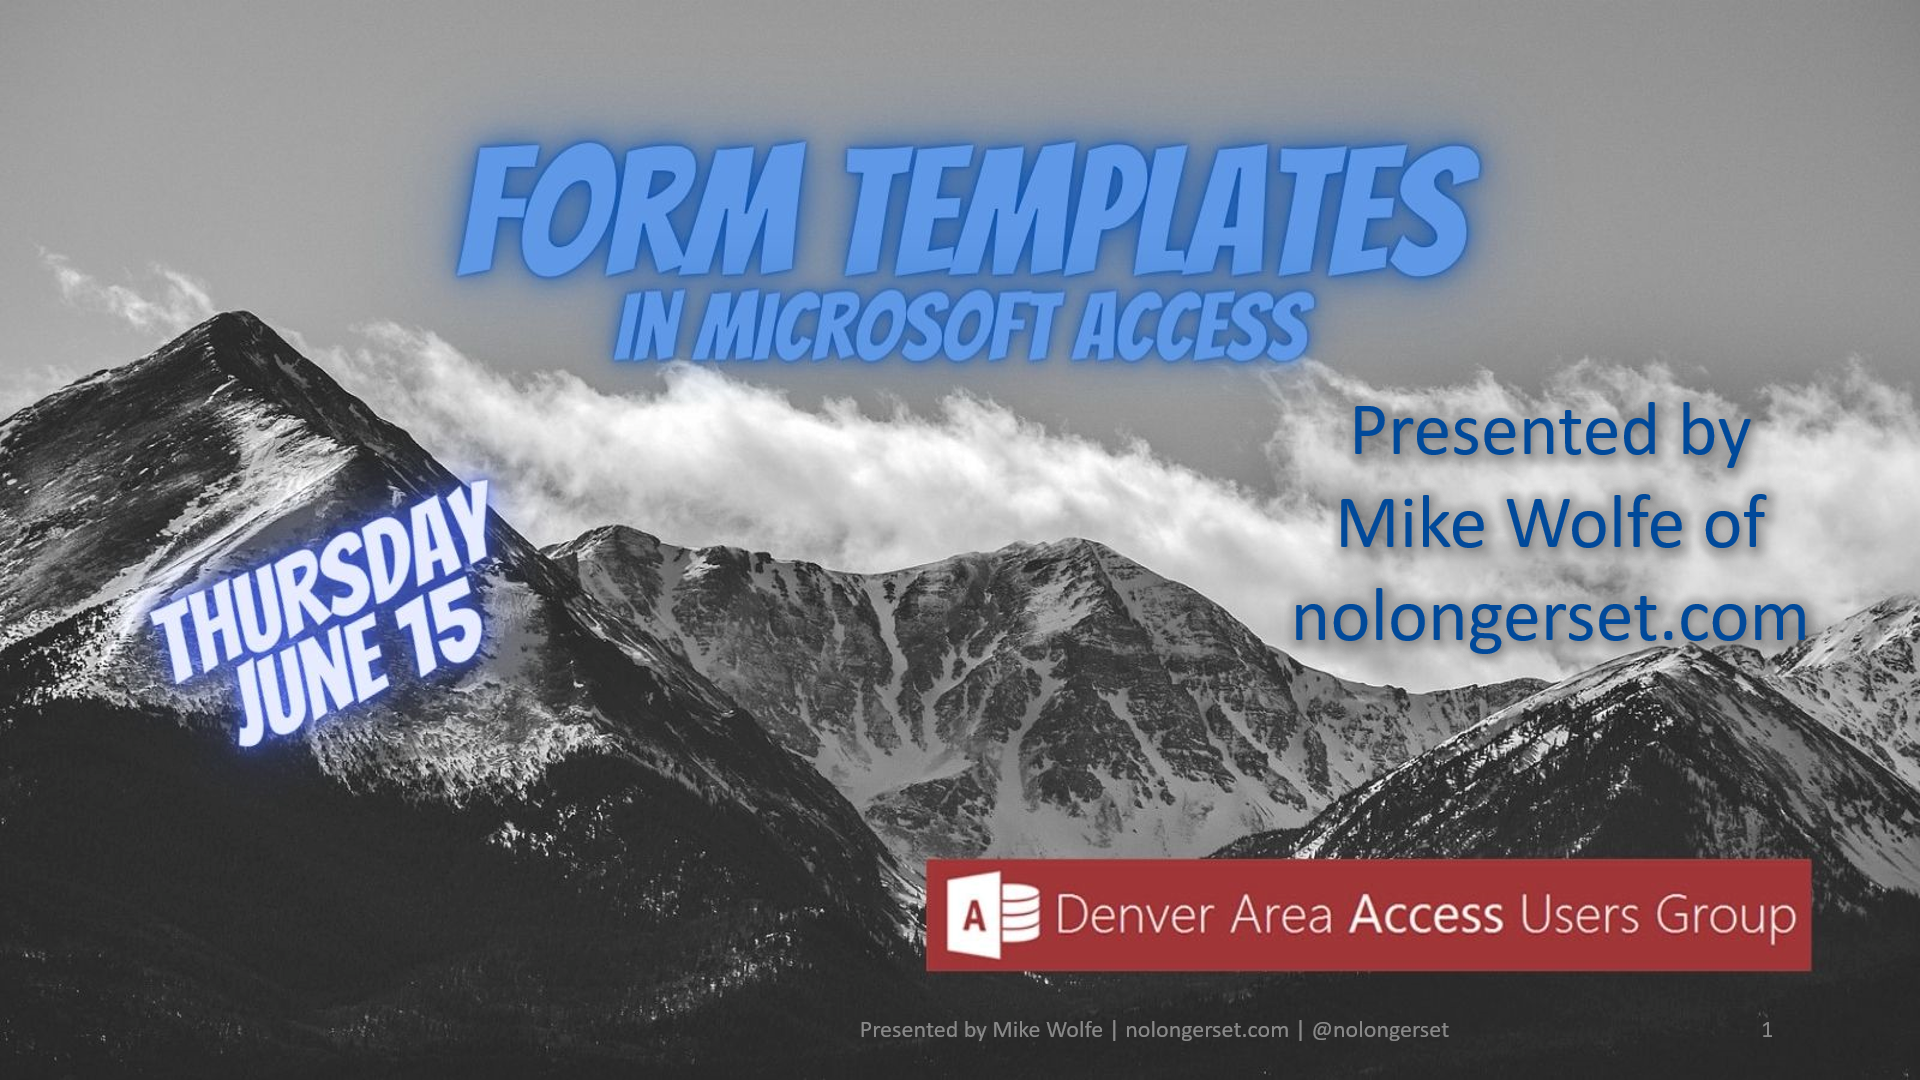 Form Templates Presentation to the Denver Area Access User Group